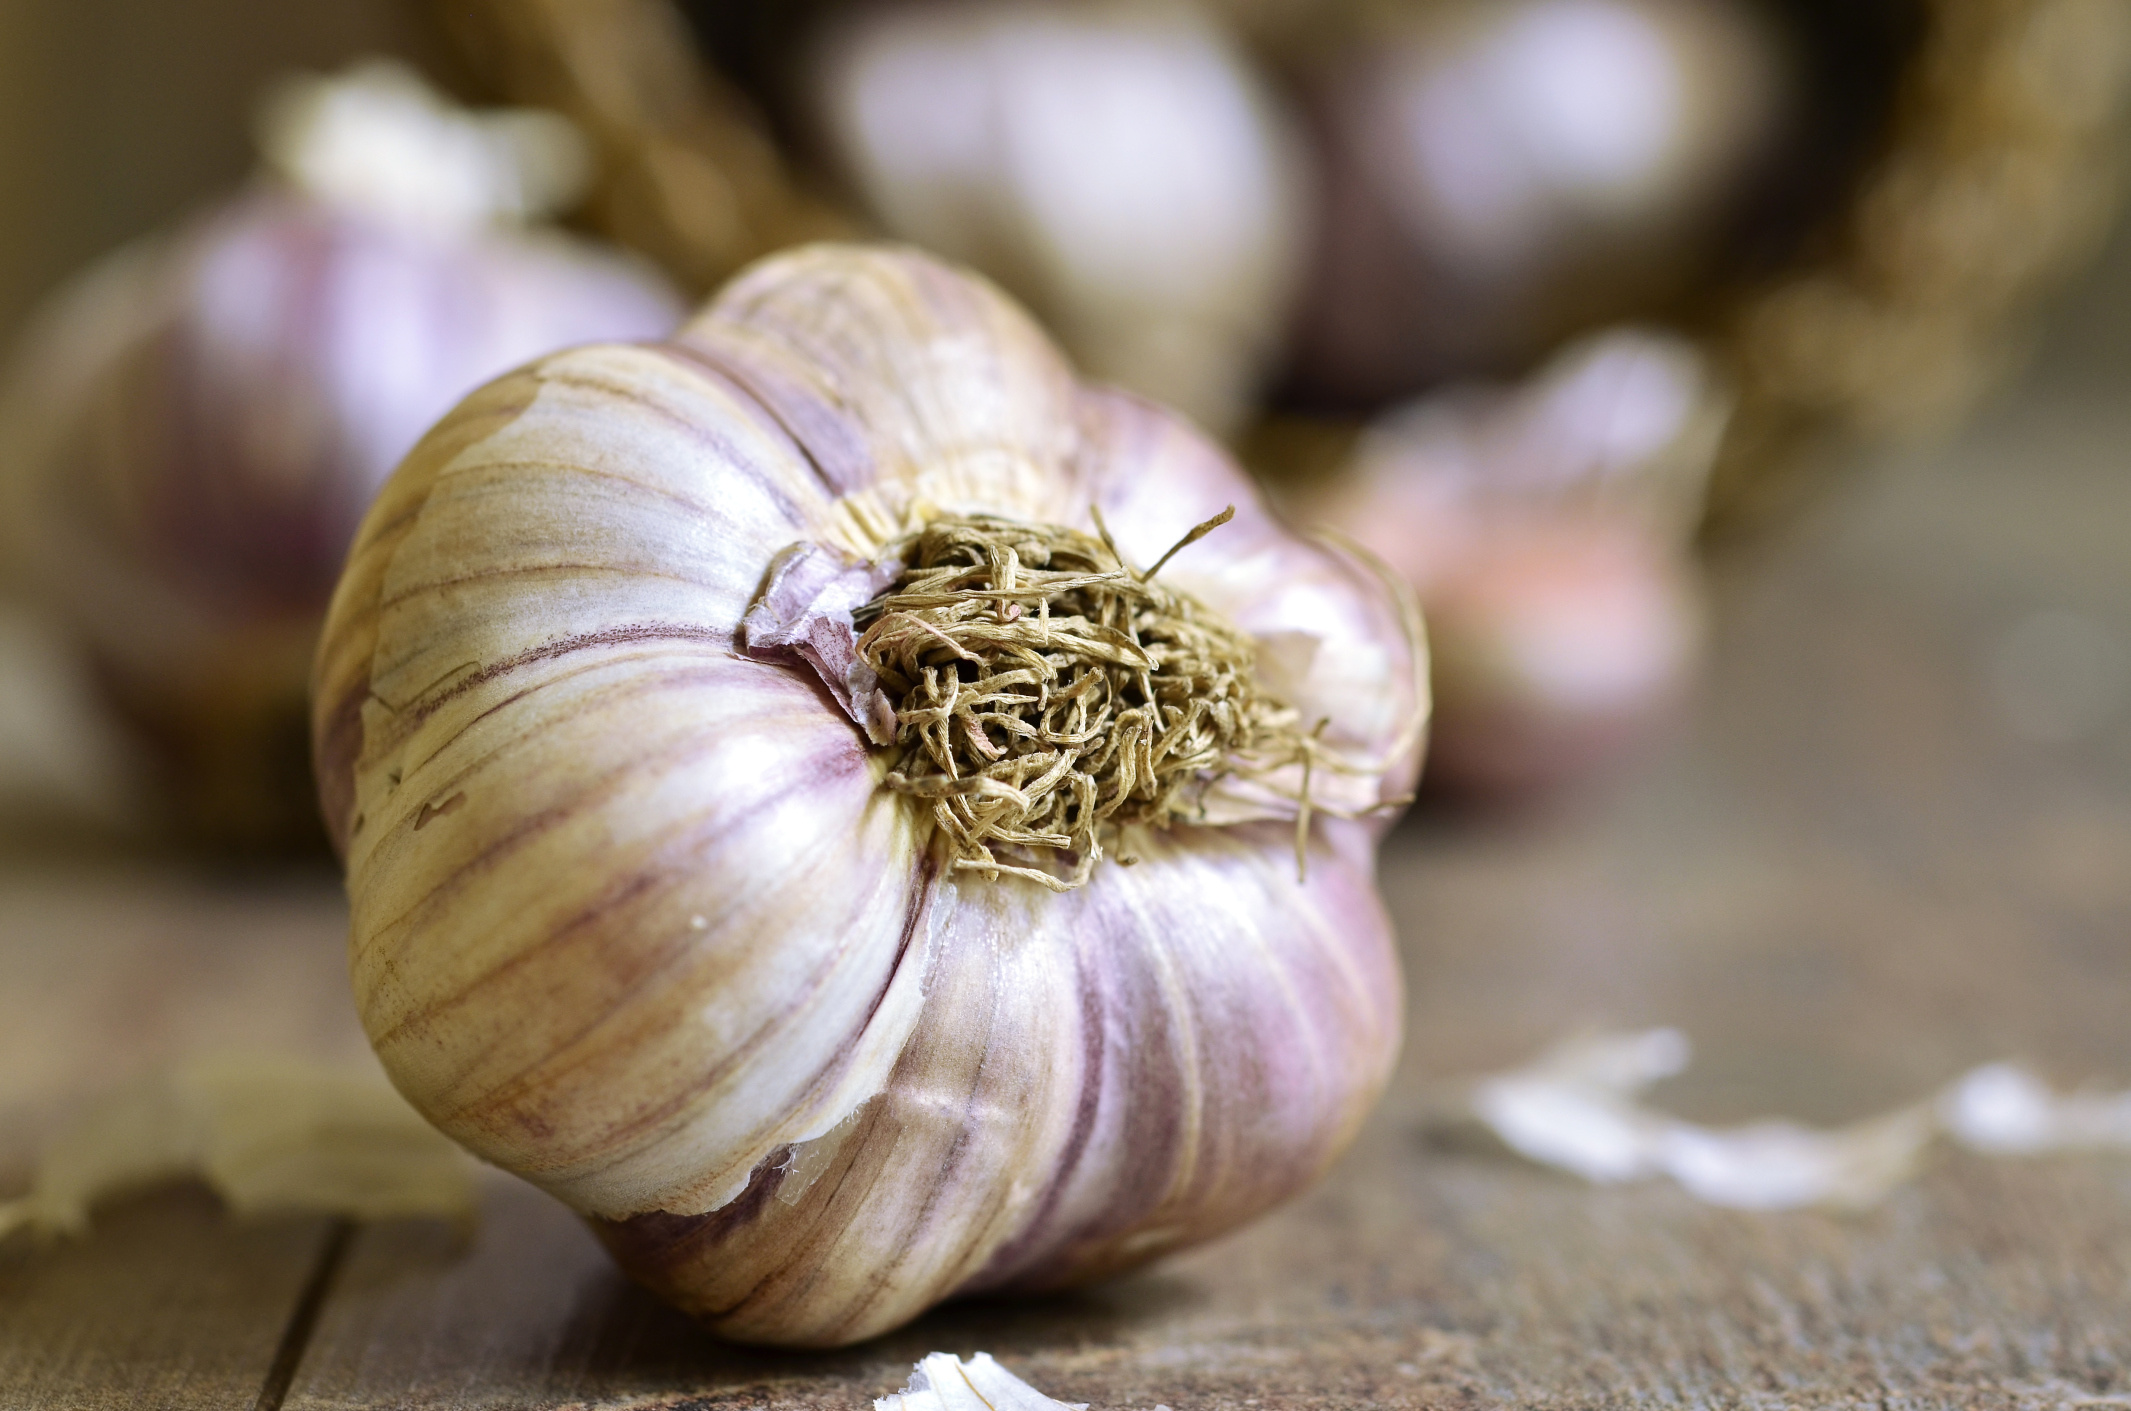 Digestive effects, Garlic and stomach, Common concerns, Livestrong article, 2140x1420 HD Desktop